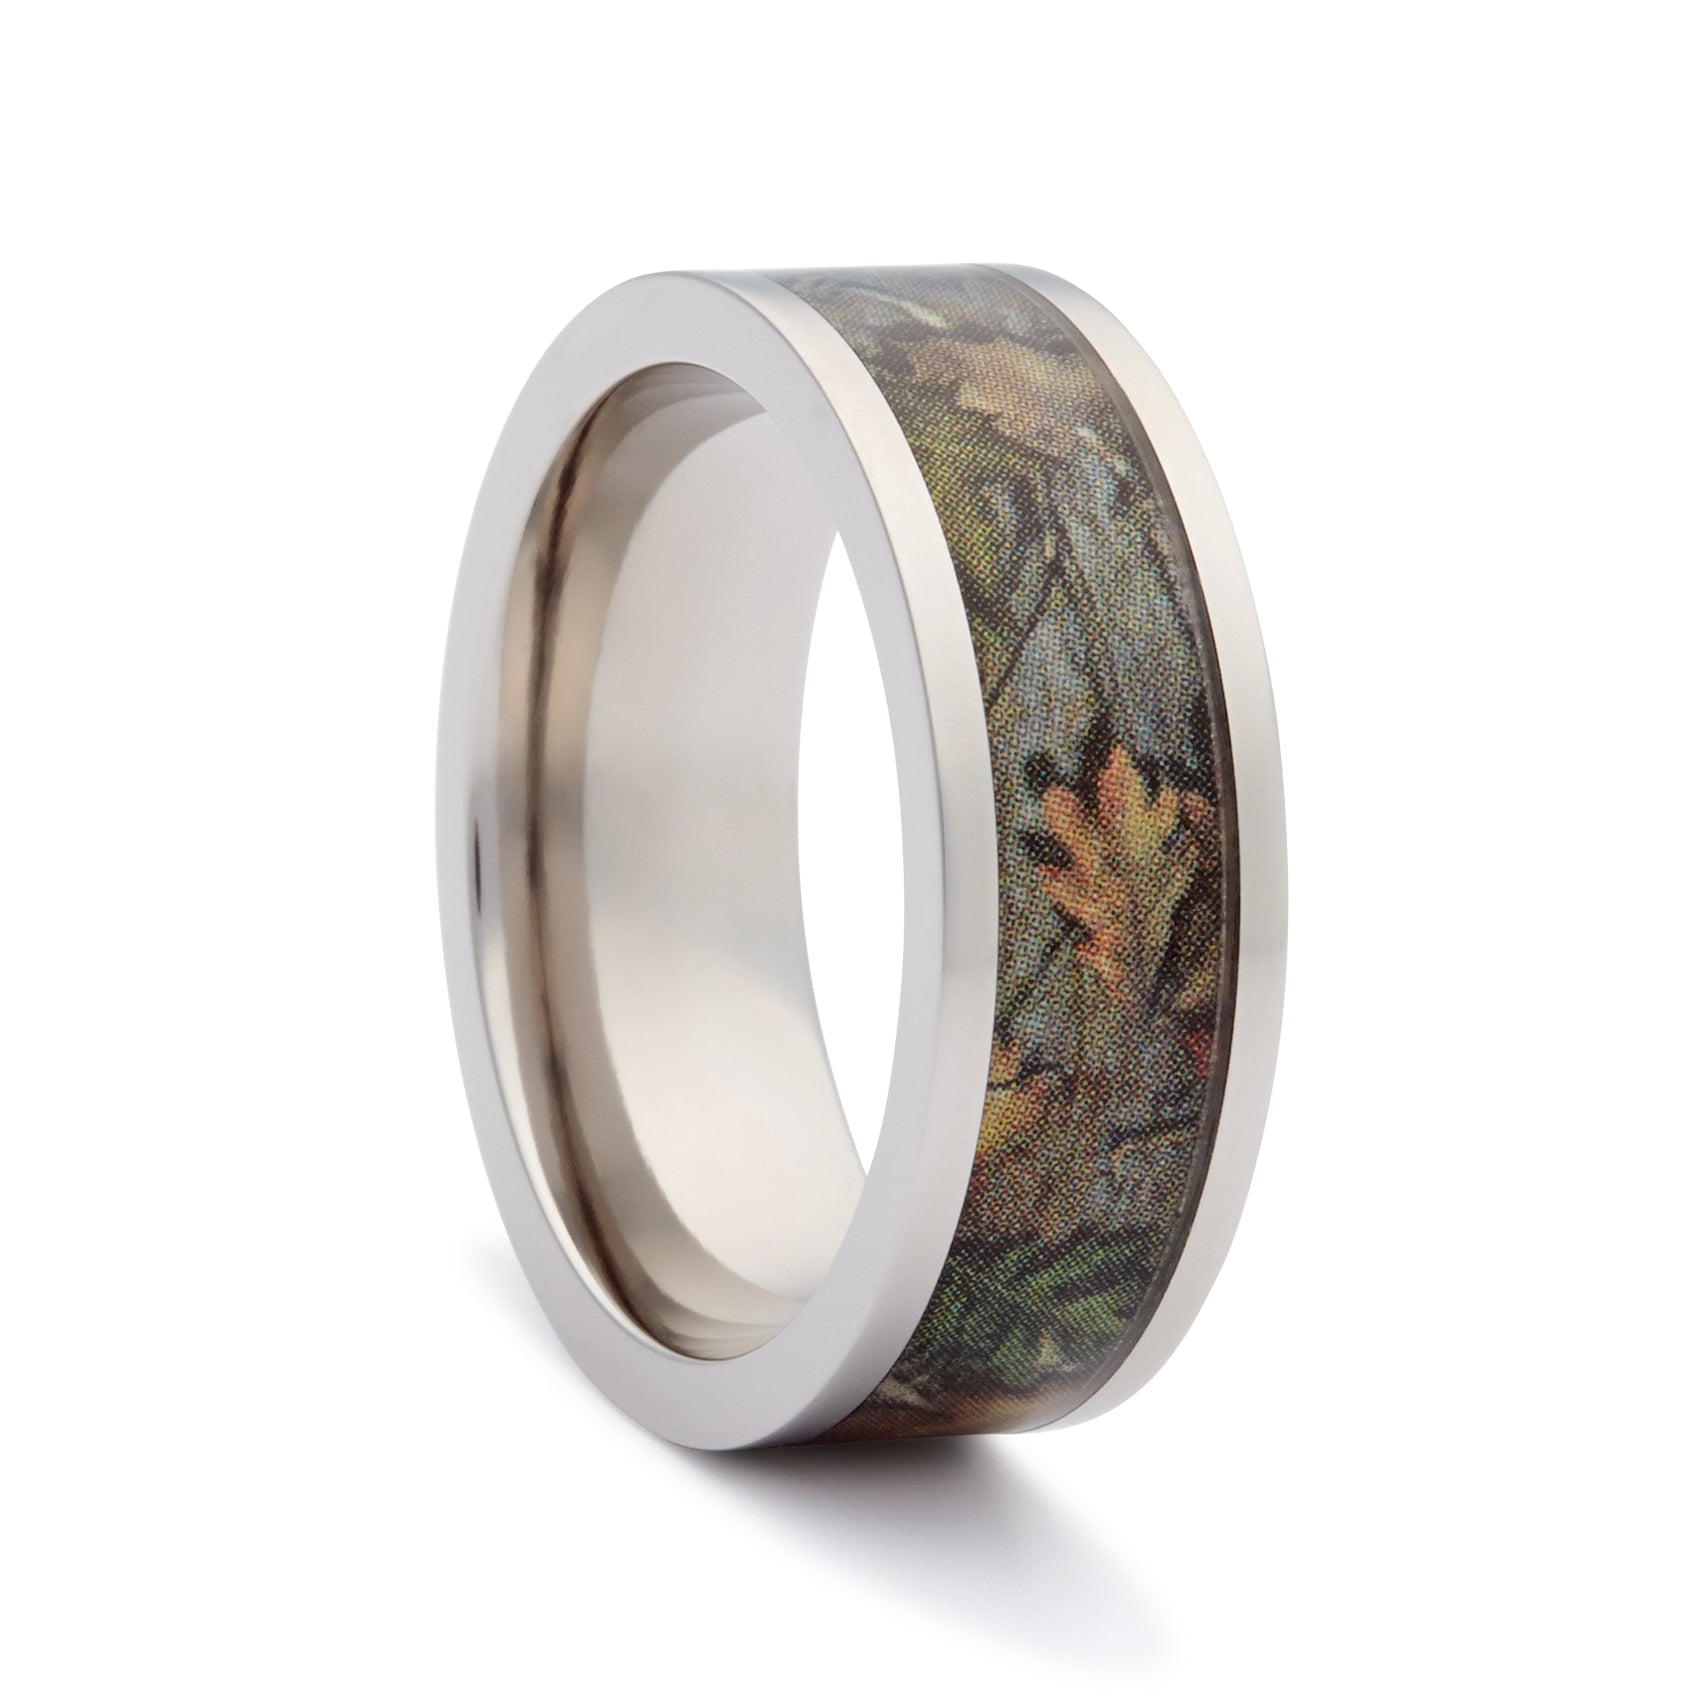 Official Licensed RealTree AP Camo Hammered Titanium Rings Camo Wedding Bands 